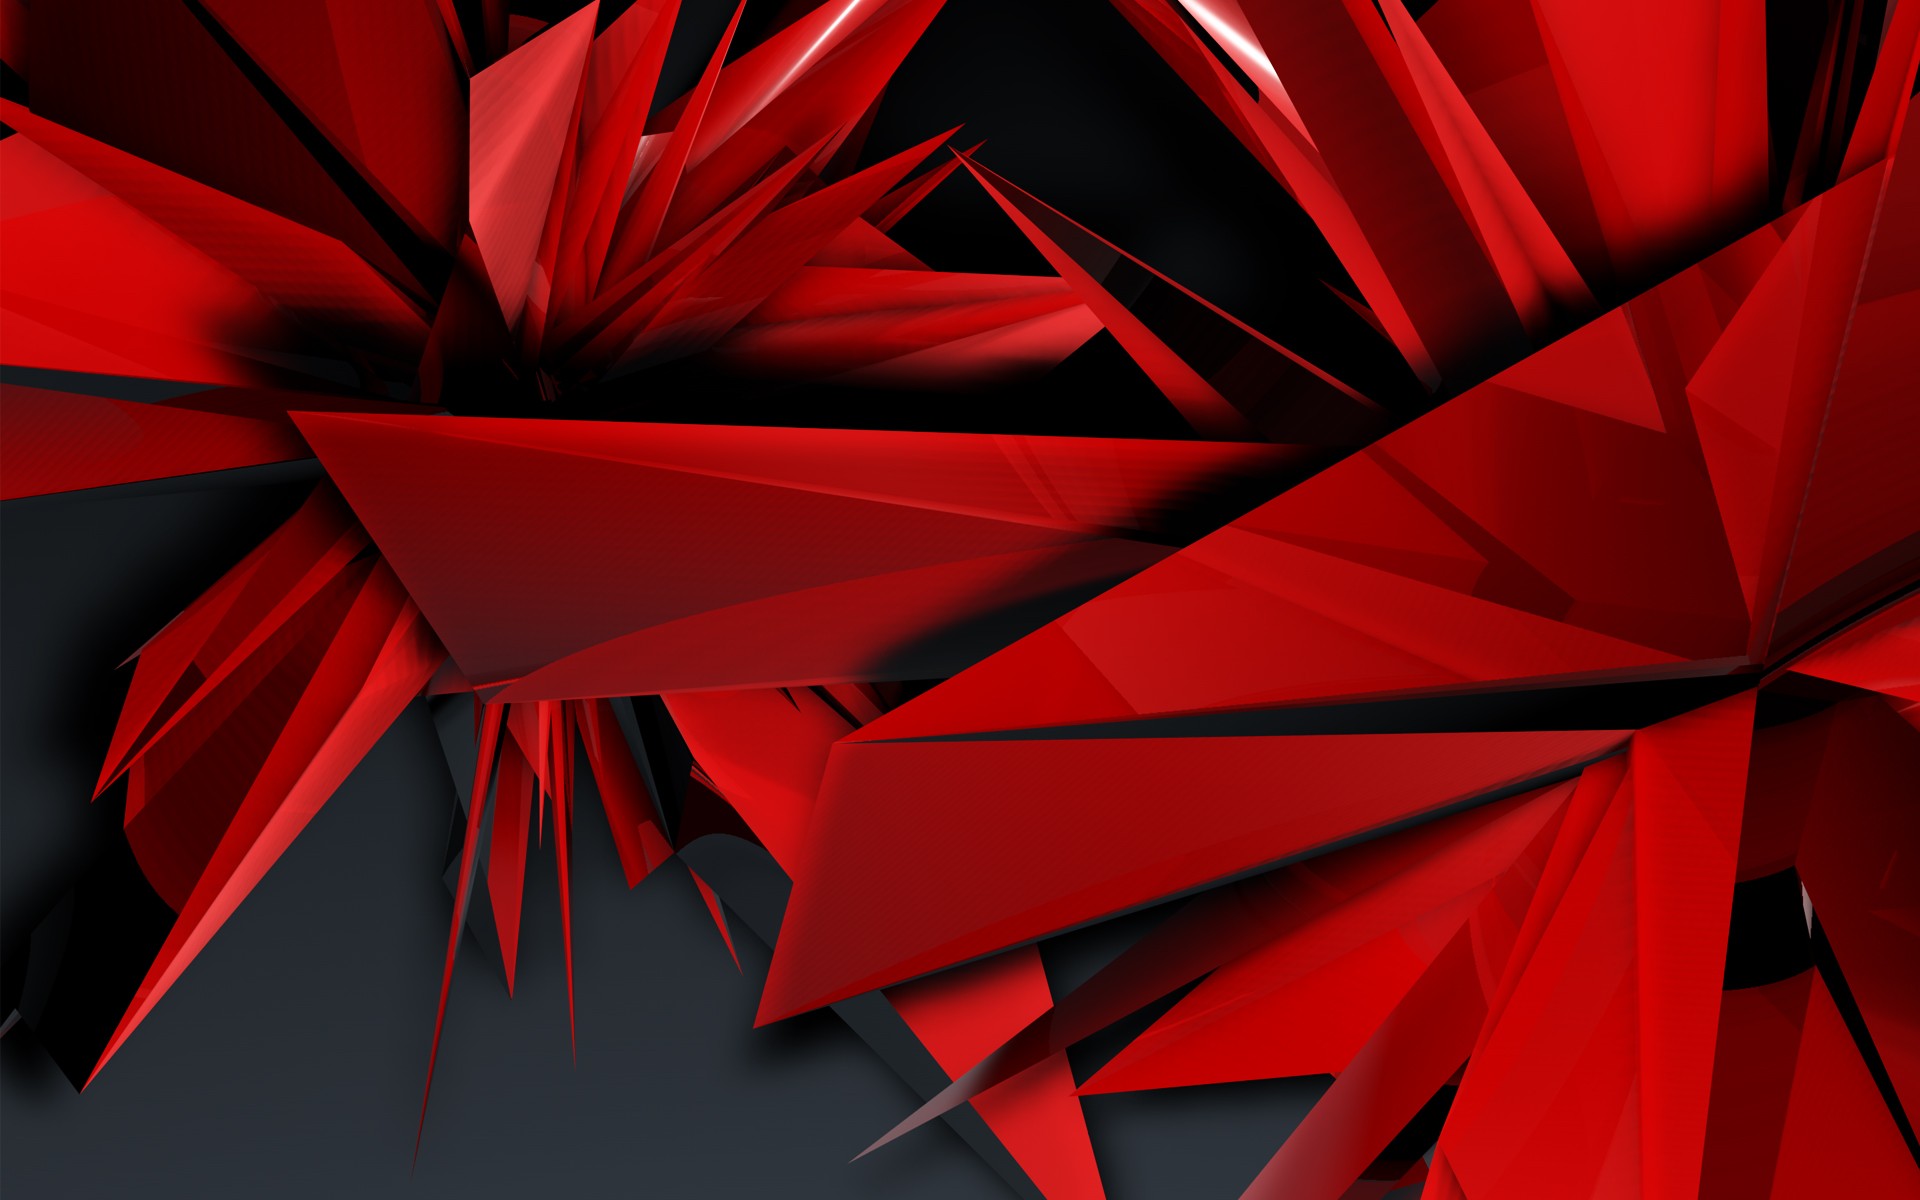 Fantastic Abstract Red Artwork HD Wallpaper Picture For PC Desktop